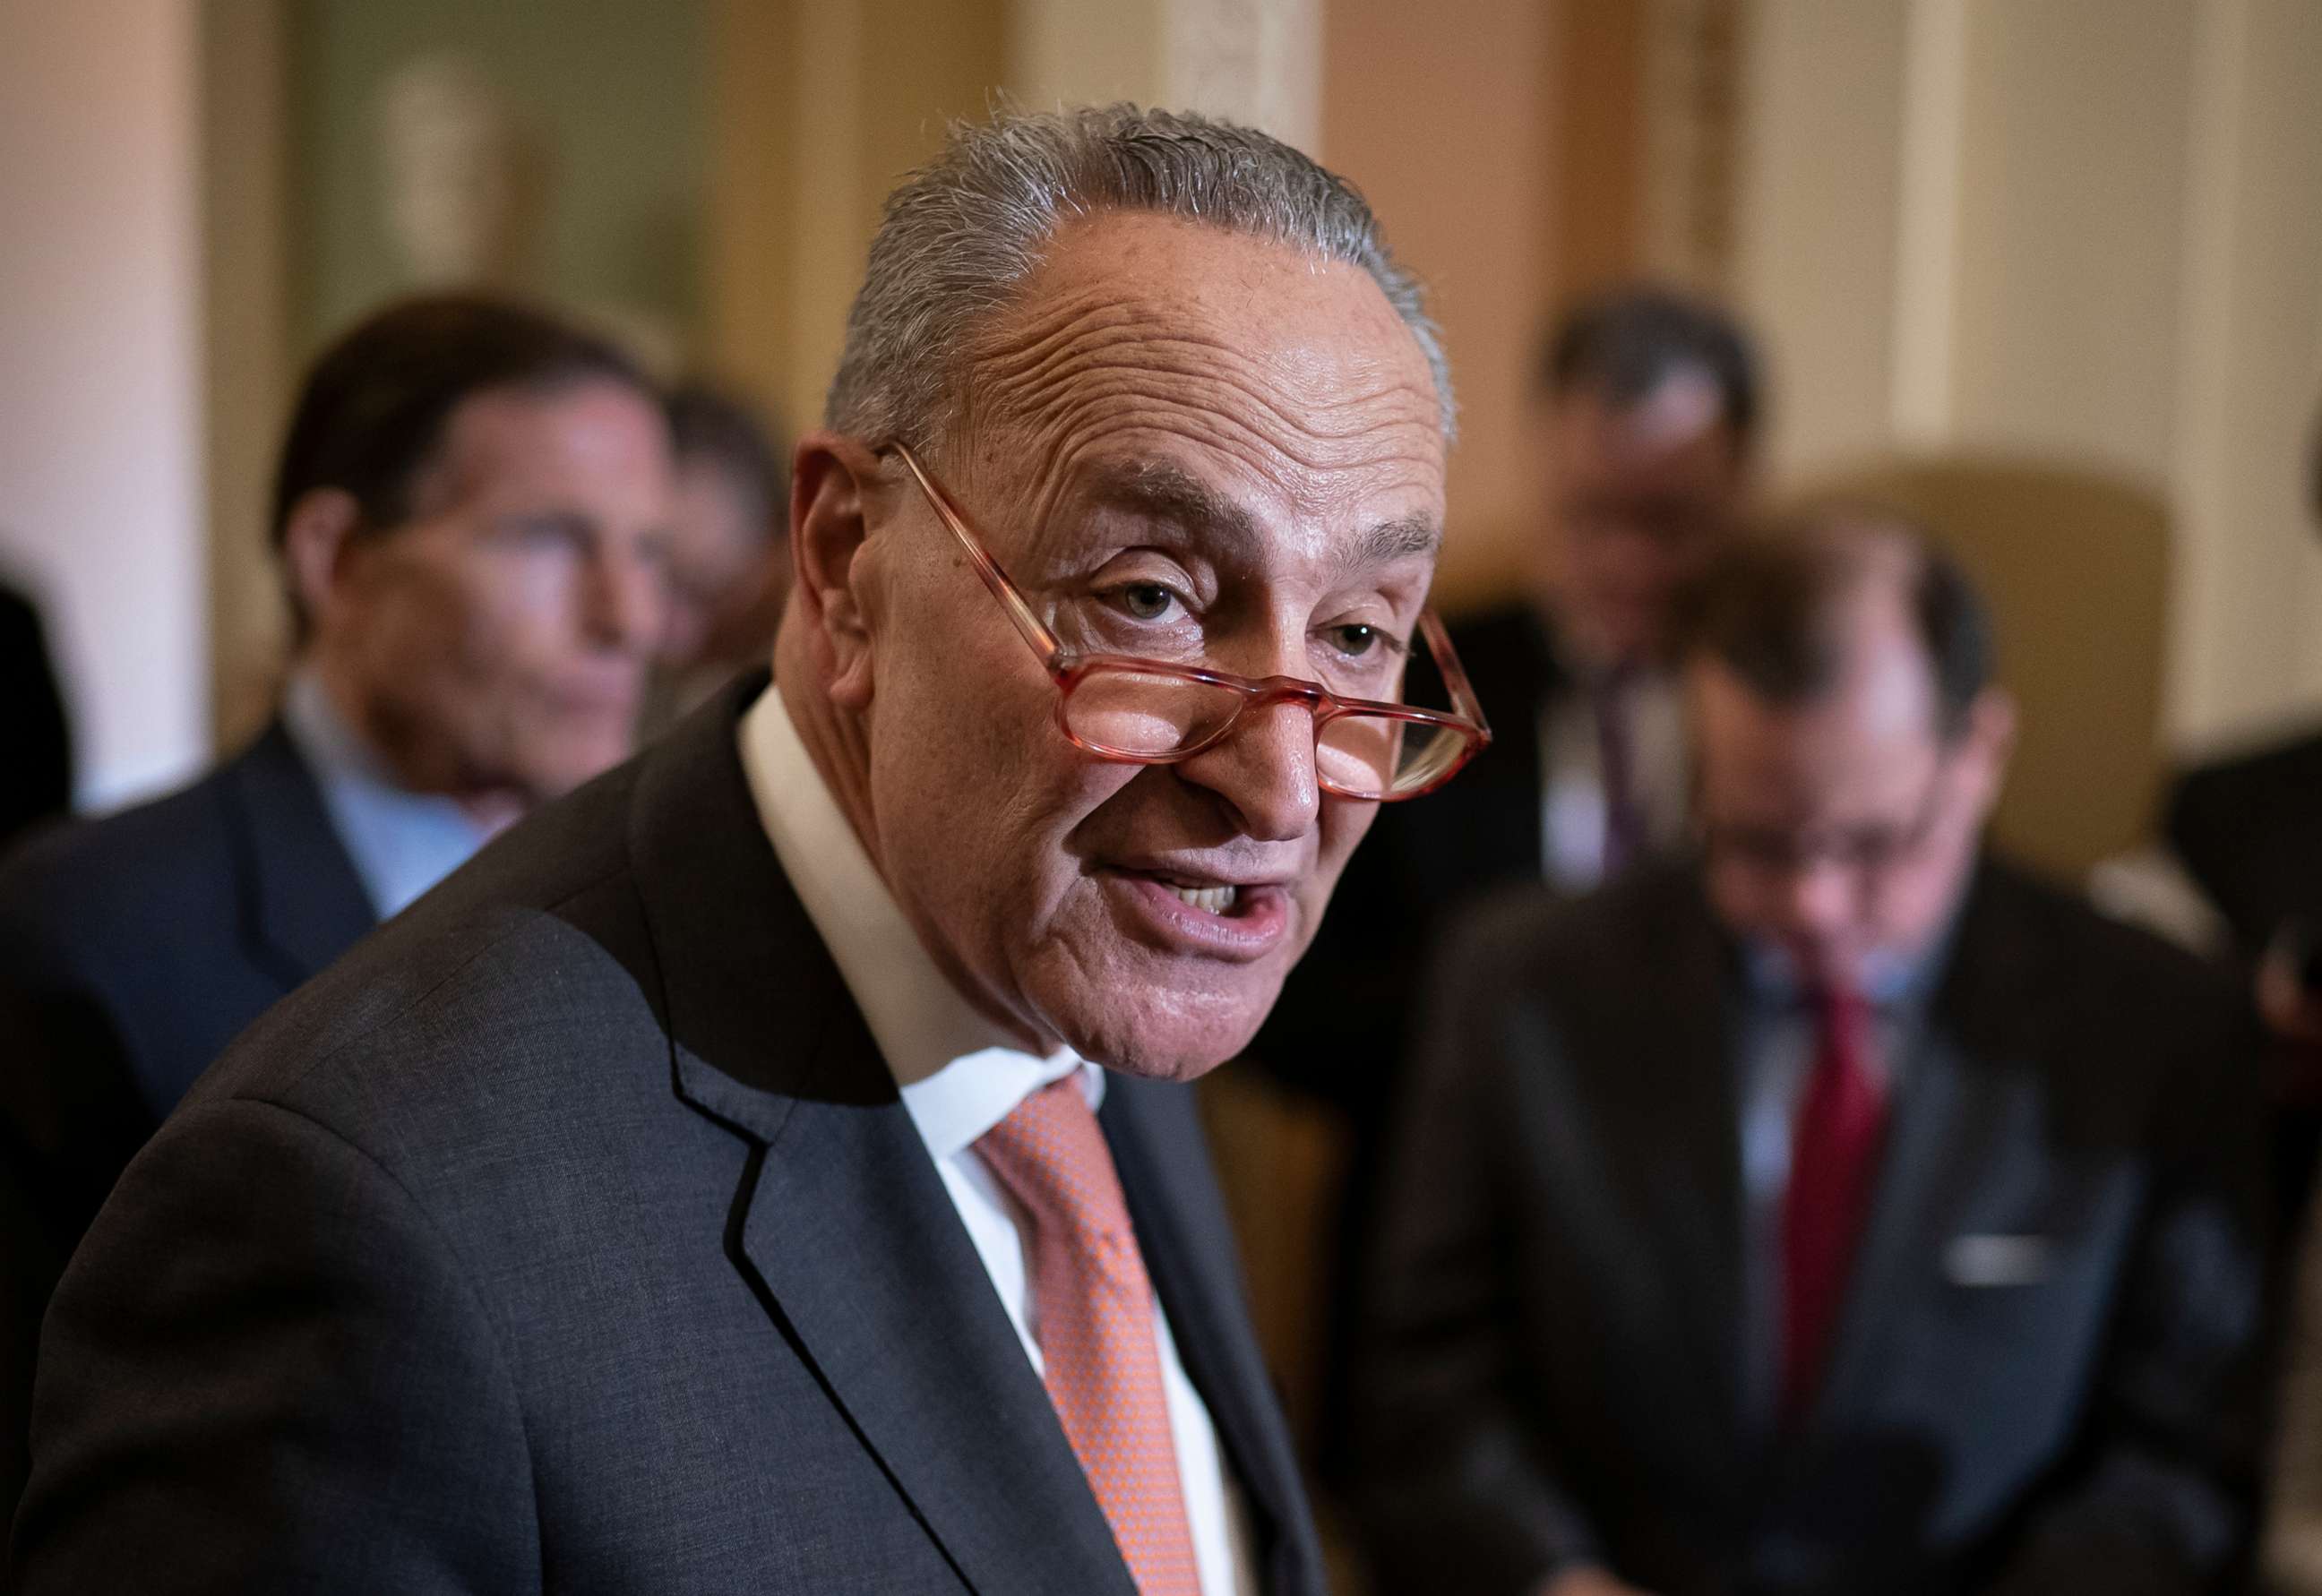 PHOTO: Senate Minority Leader Chuck Schumer talks to reporters following a Democratic strategy meeting at the Capitol in Washington, Feb. 11, 2020.